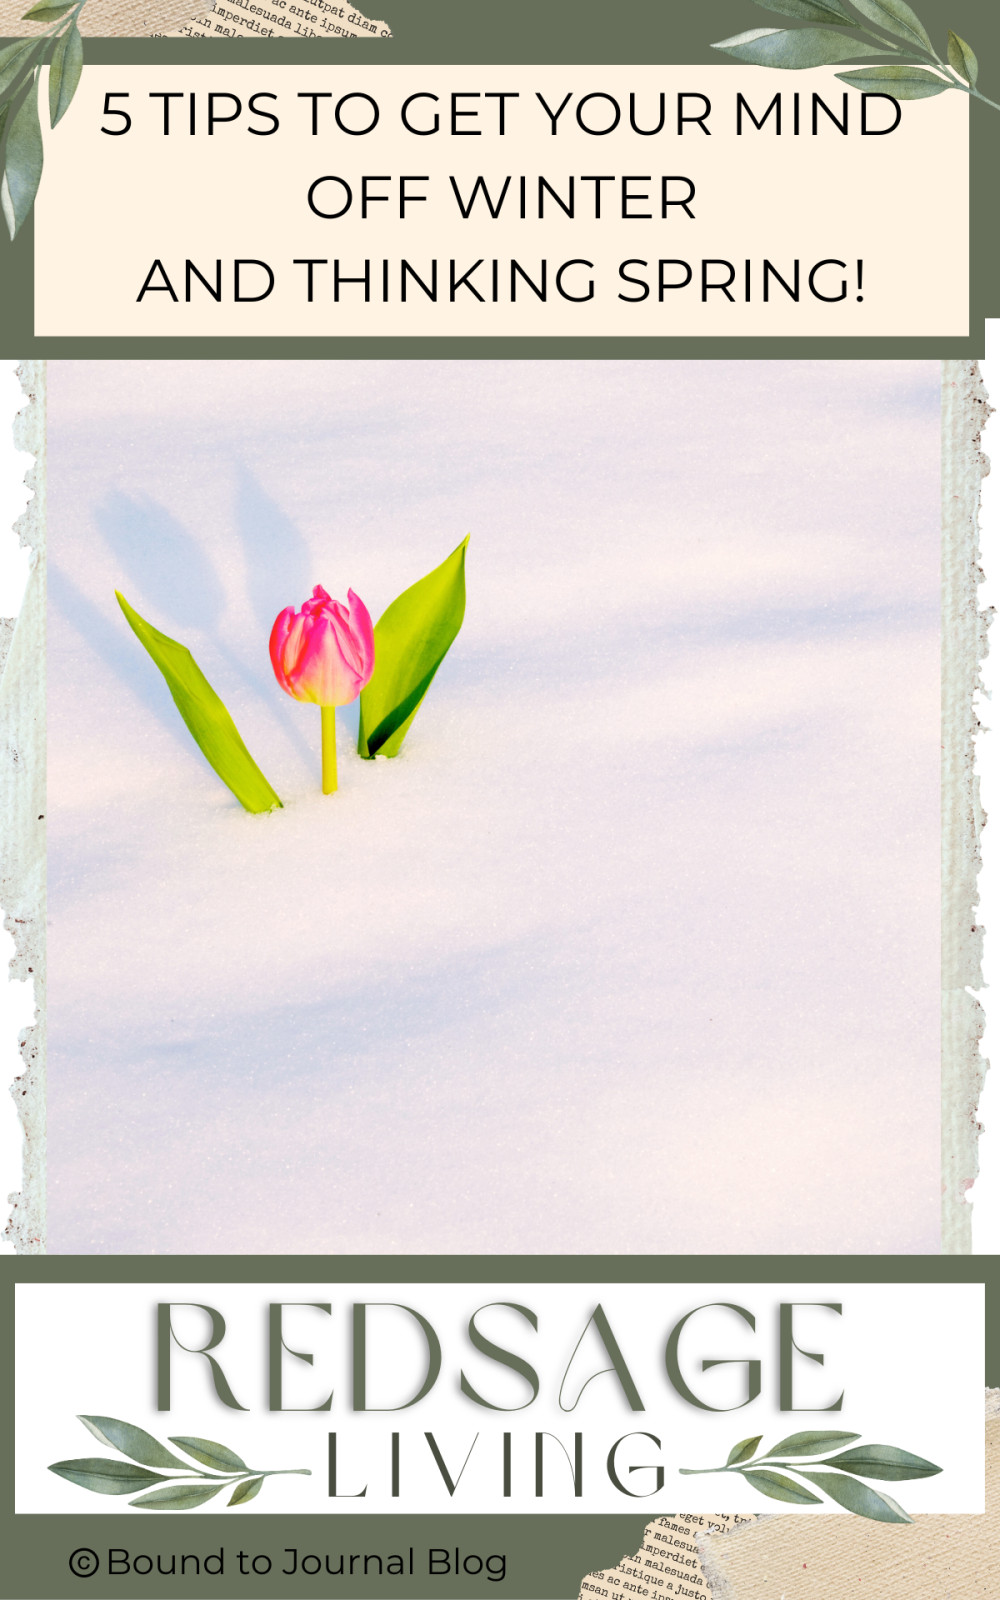 5 Tips to Get Your Mind Off Winter and Thinking Spring!